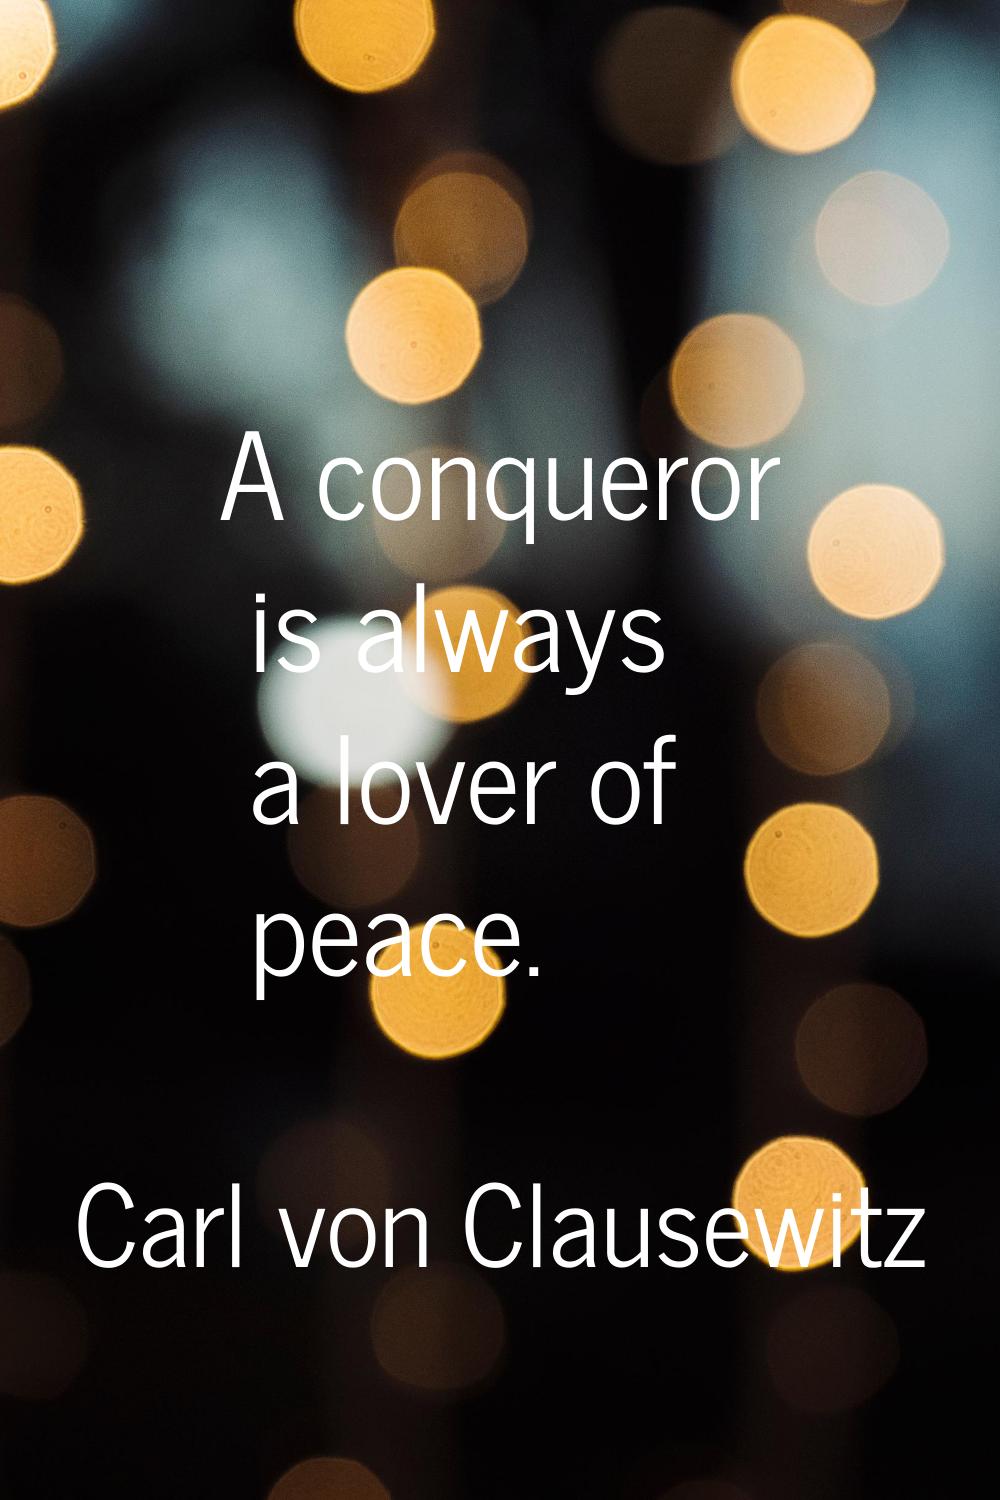 A conqueror is always a lover of peace.